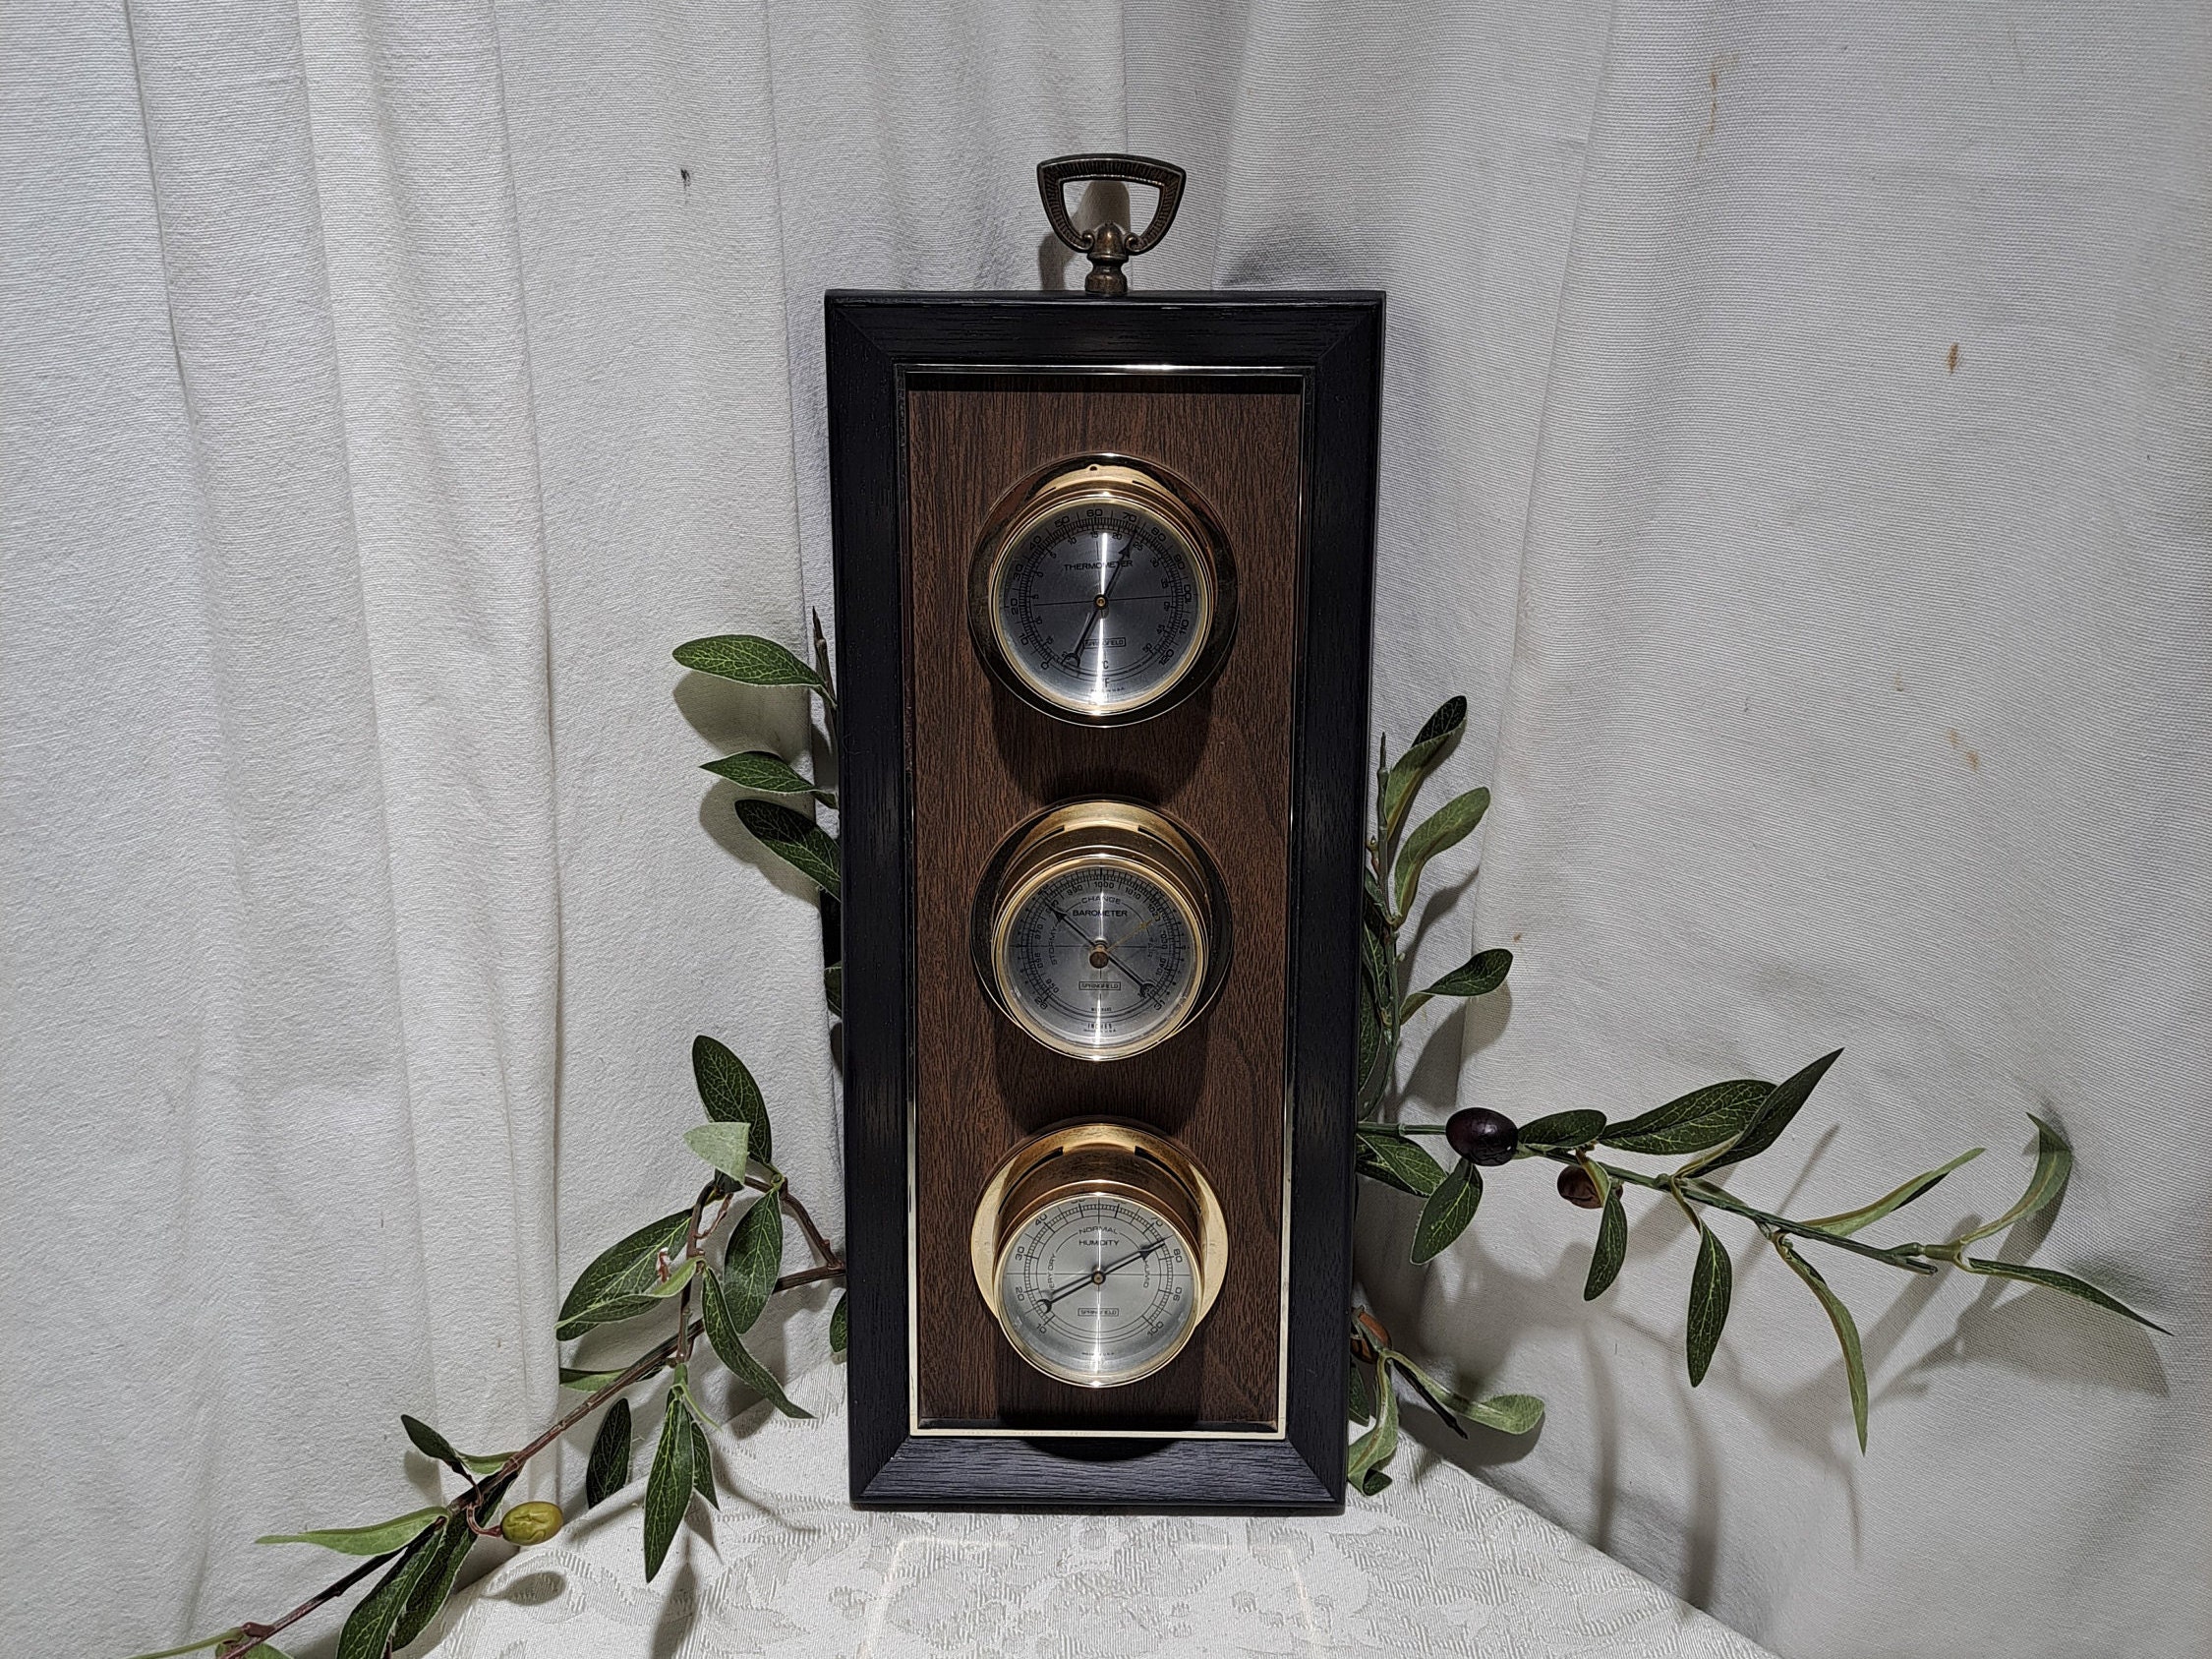 1960s Hanging Brass Temperature Thermometer Gauge